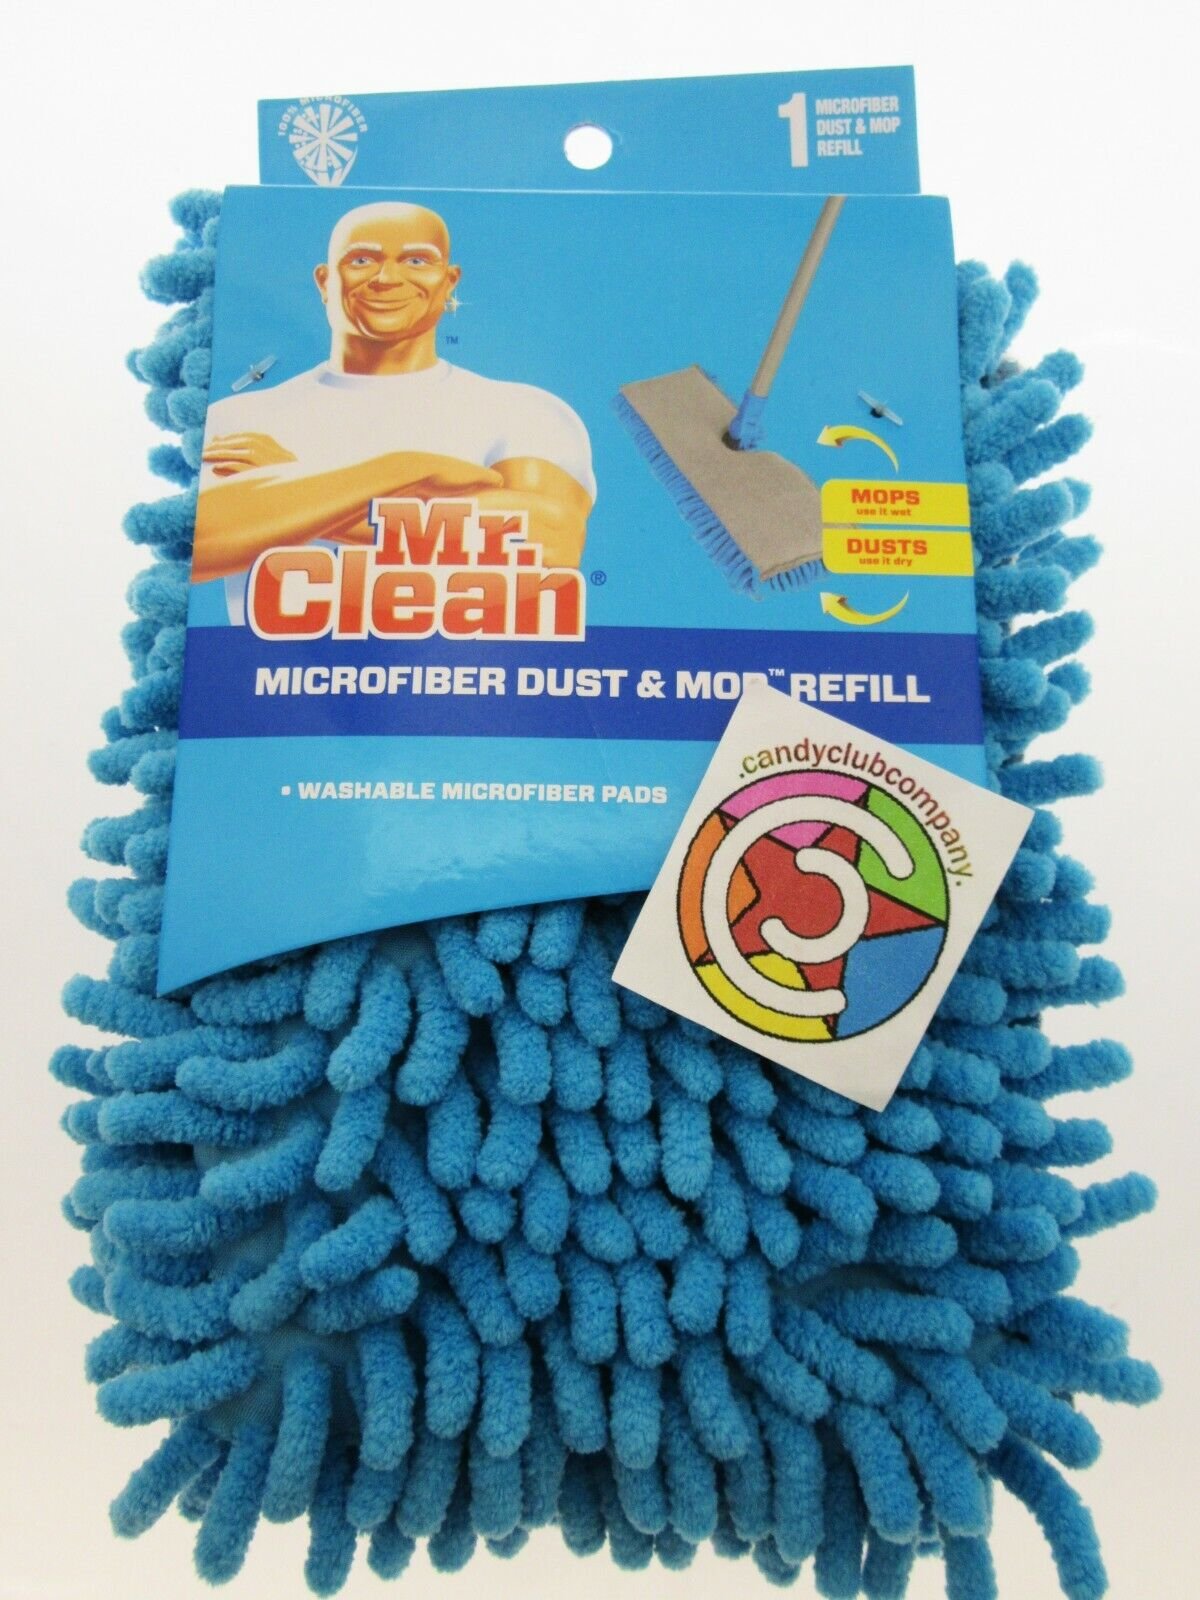 MR. CLEAN Microfiber Dust and Mop Refill Cleaning Head - Light Blue